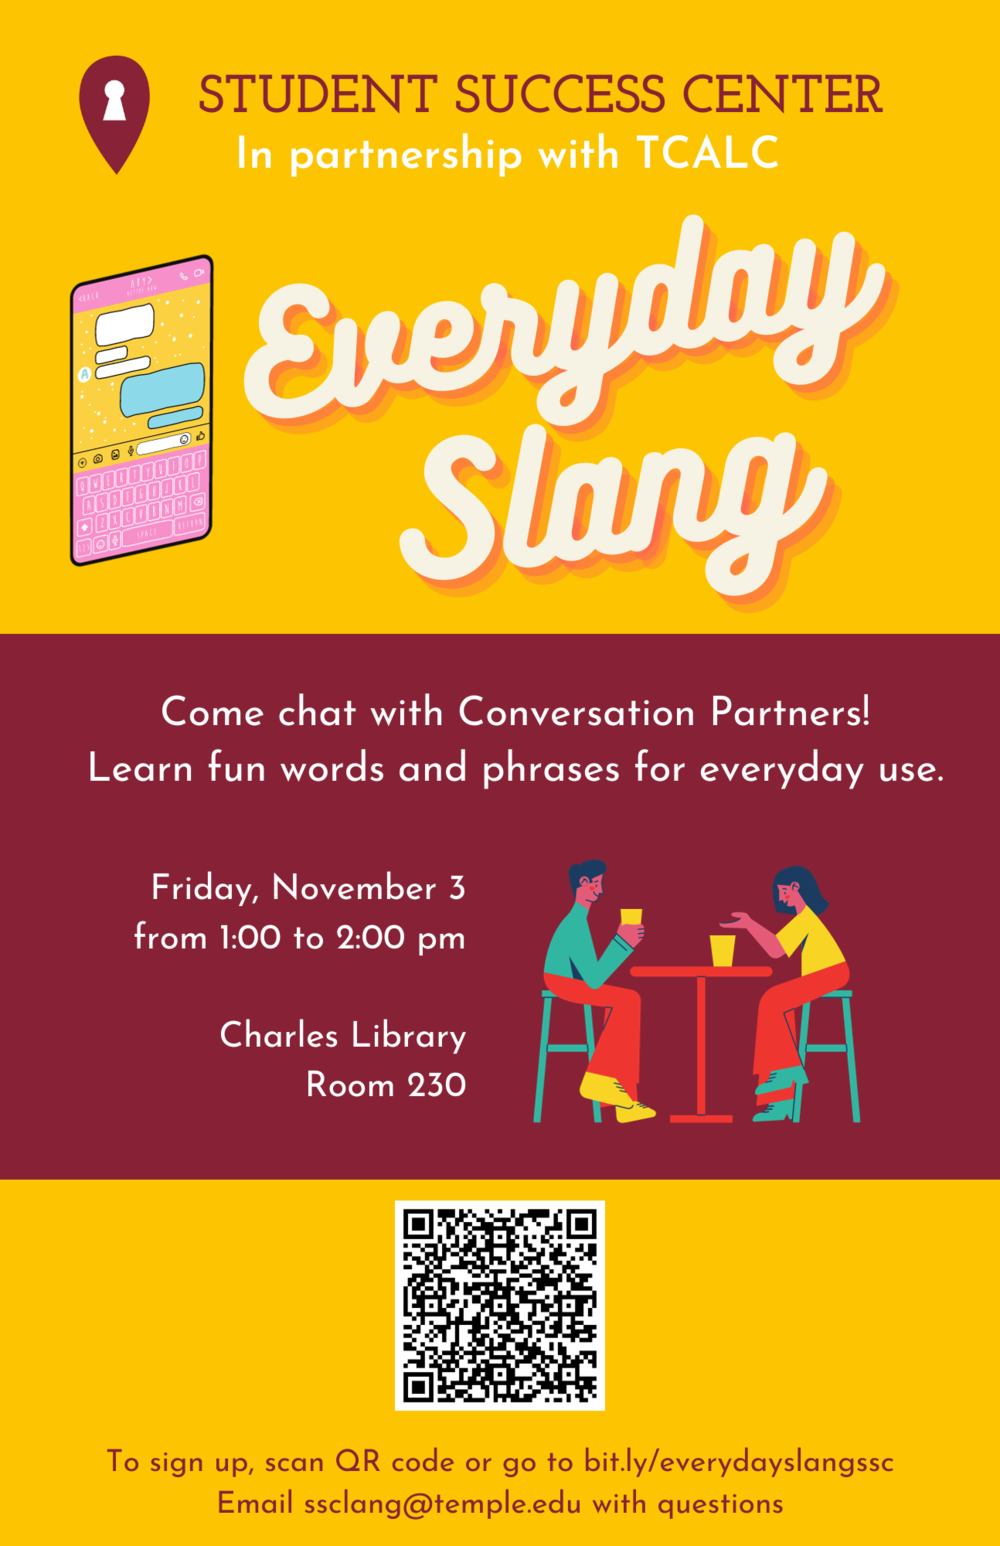 Flyer for everyday slang event shows people chatting at a table with the same information as above.